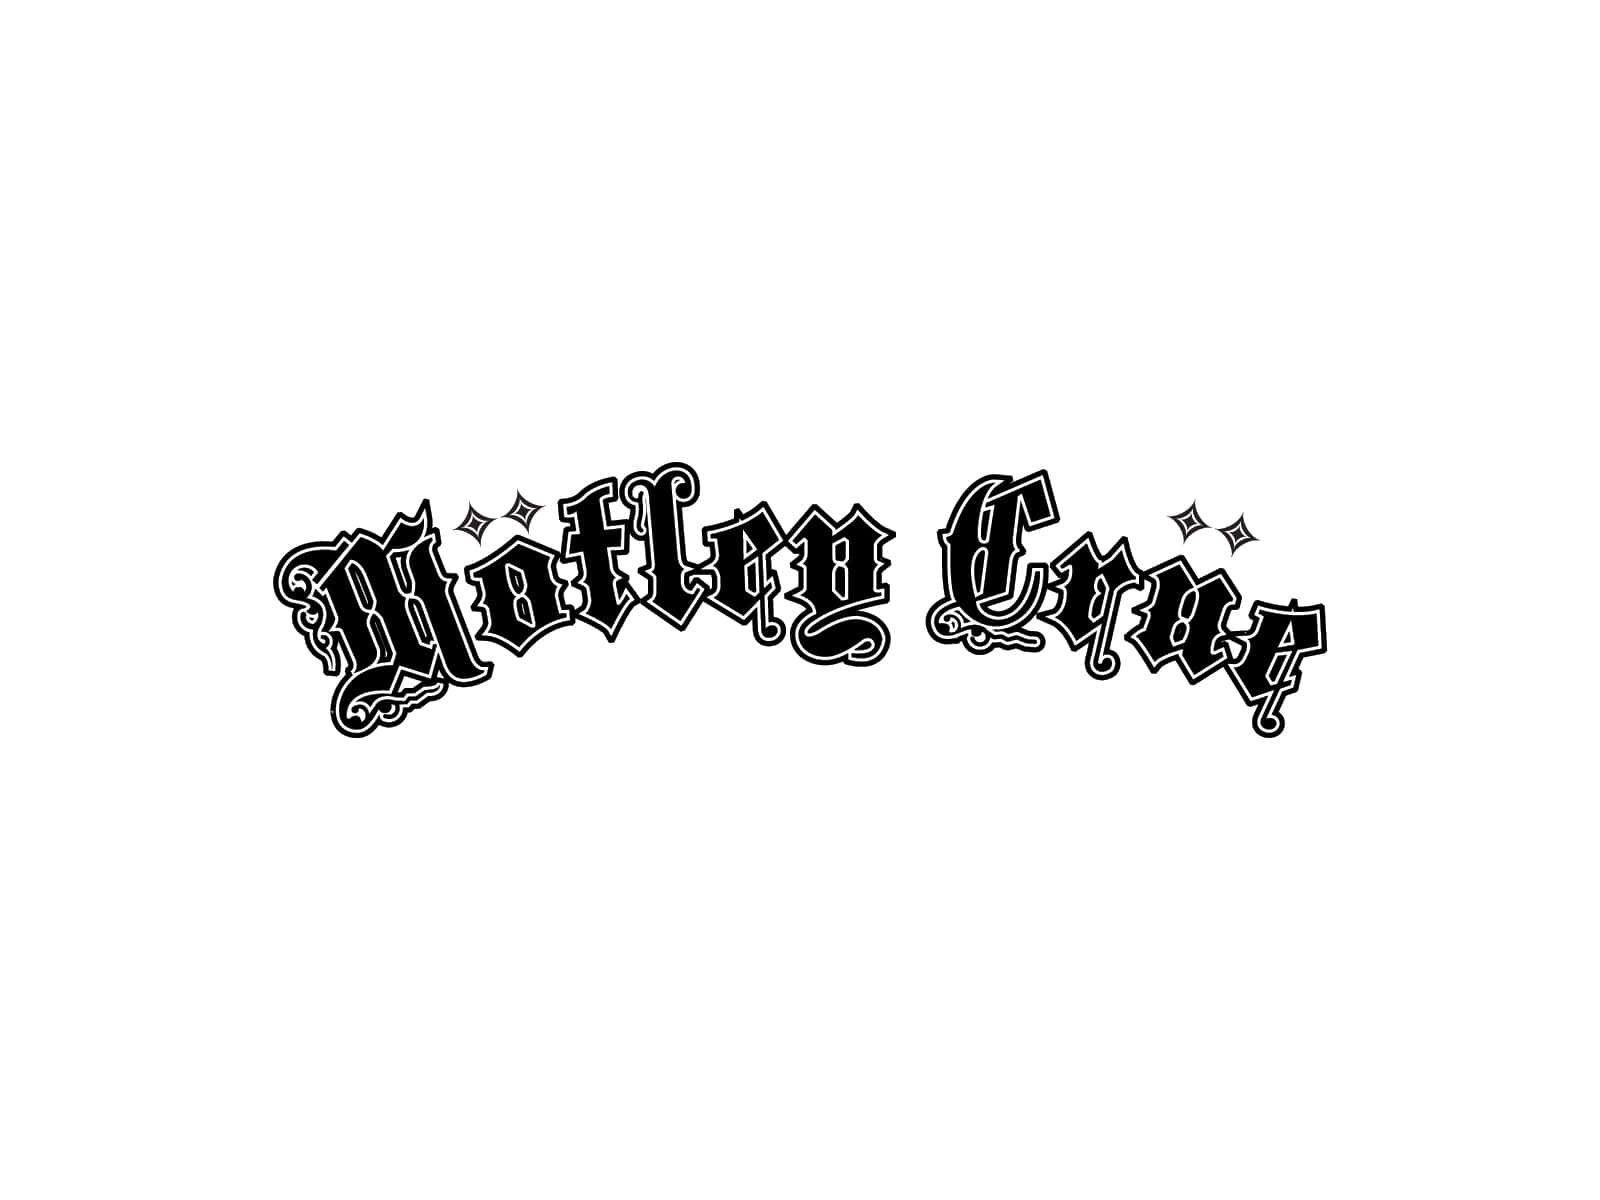 Ready to rock and roll with Motley Crue! Wallpaper